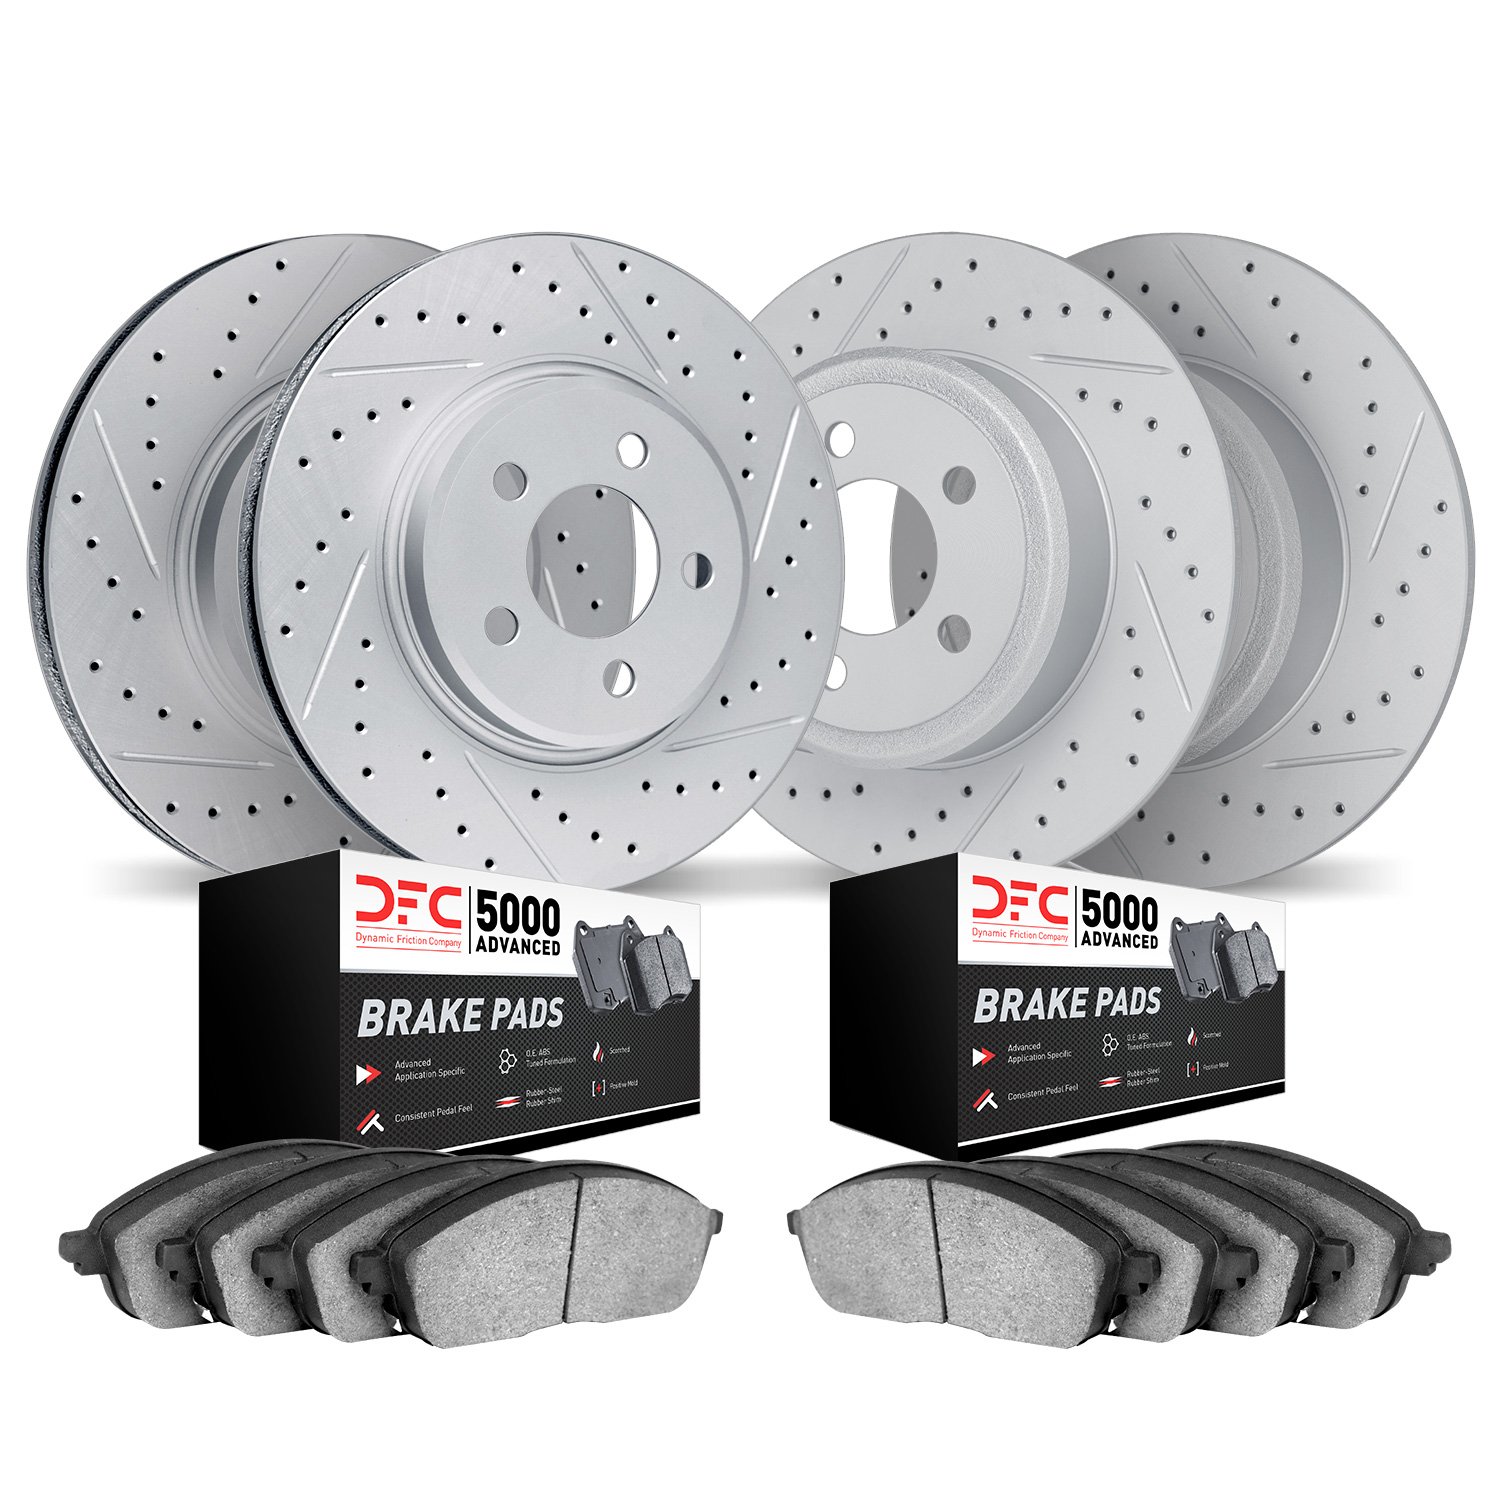 2504-54319 Geoperformance Drilled/Slotted Rotors w/5000 Advanced Brake Pads Kit, Fits Select Ford/Lincoln/Mercury/Mazda, Positio